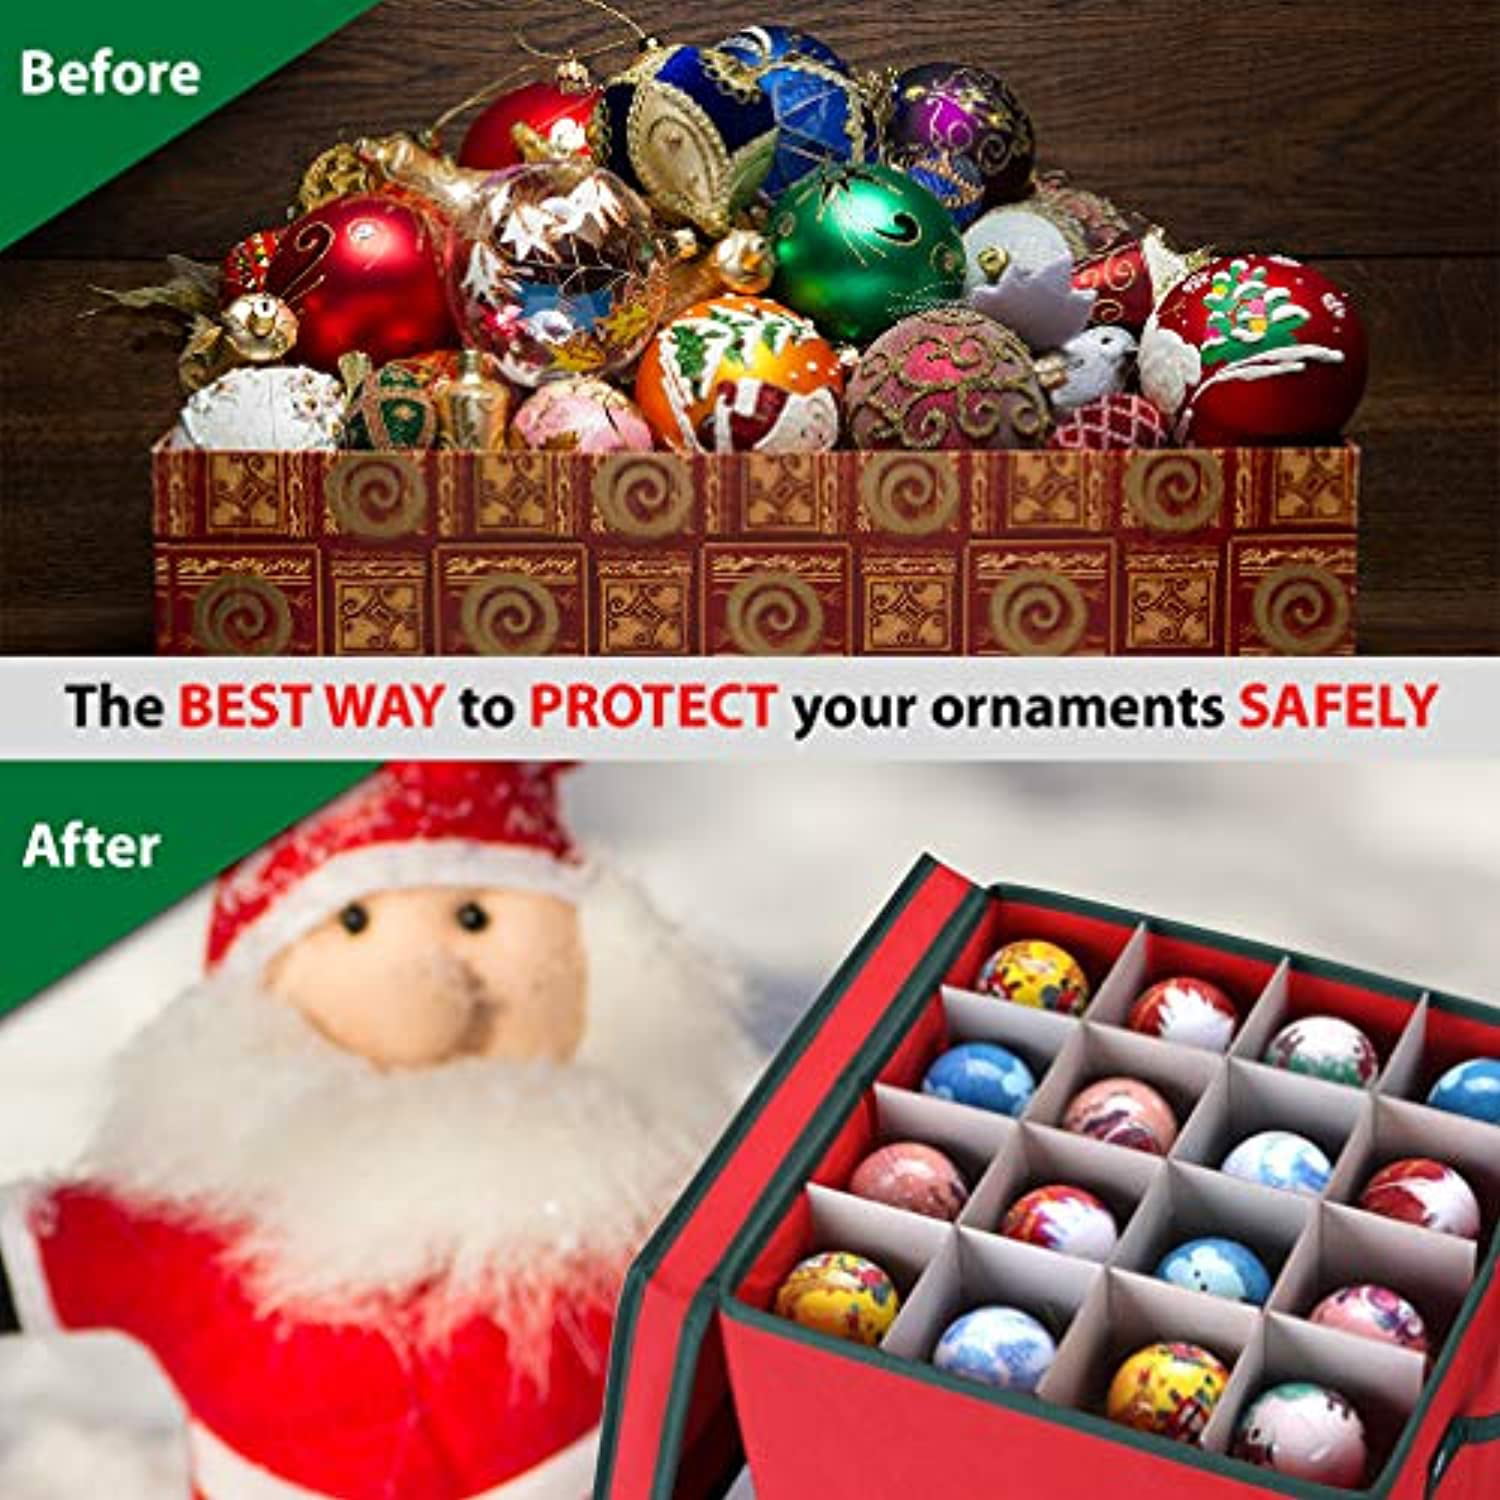 Joiedomi Christmas Ornament Storage Box with Adjustable Dividers, Hold Up to 64 Ornaments Balls & Christmas Accessories, Oxford Ornament Storage